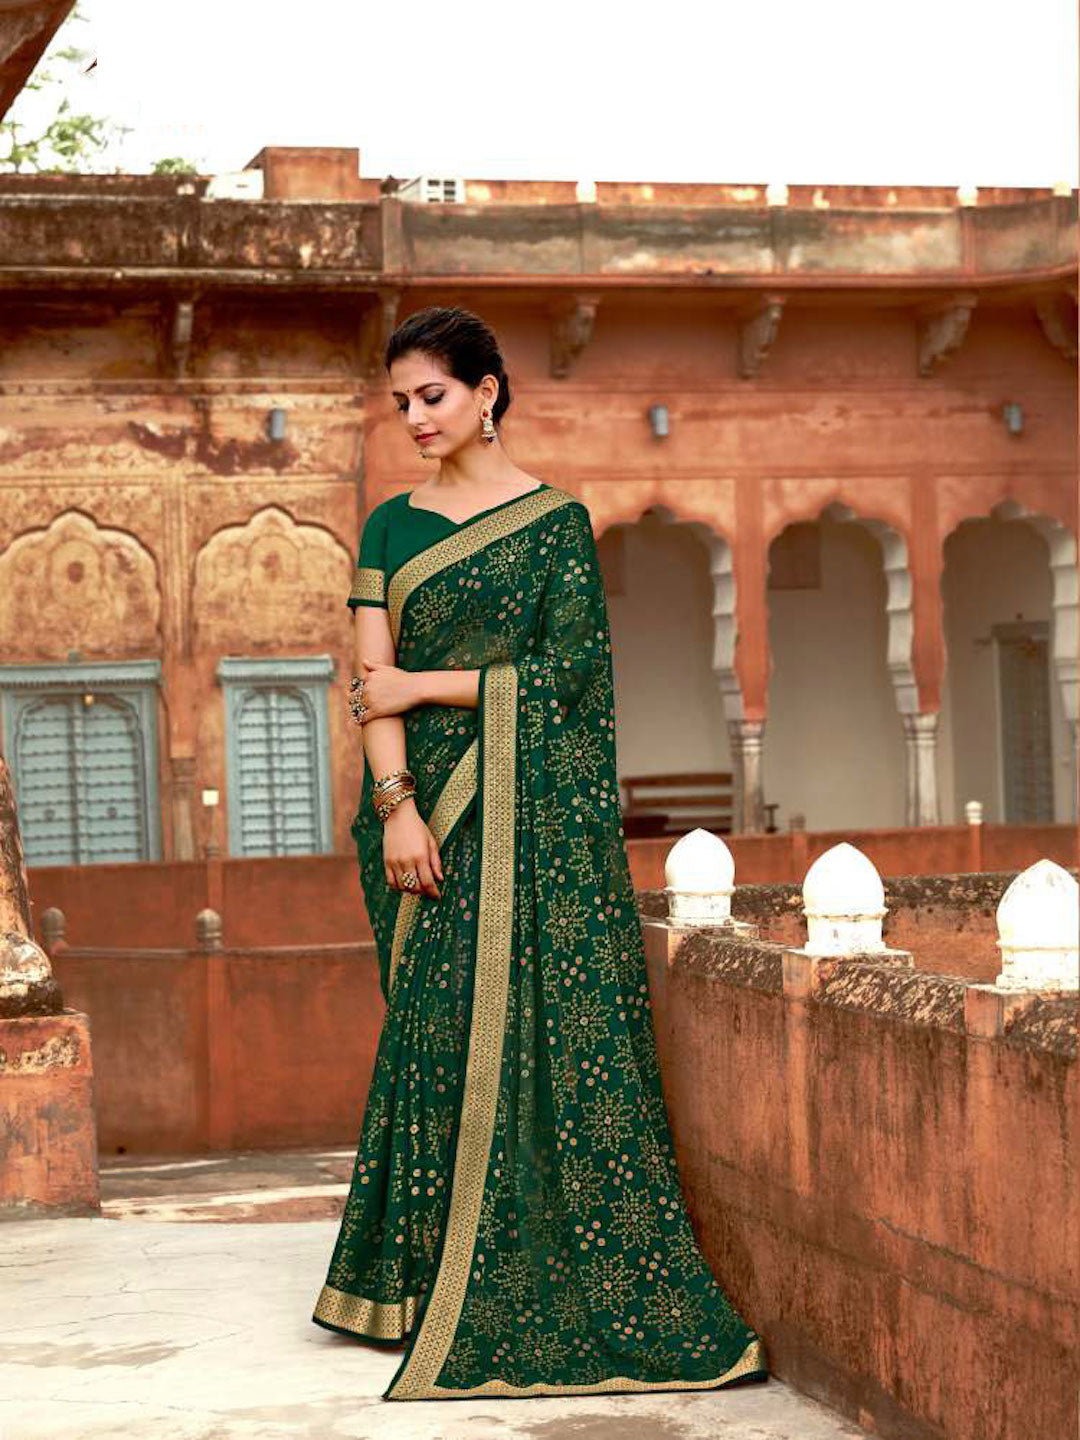 AVANTIKA: Green Patterned Designed Saree with Solid Colour Blouse [SoldOut]